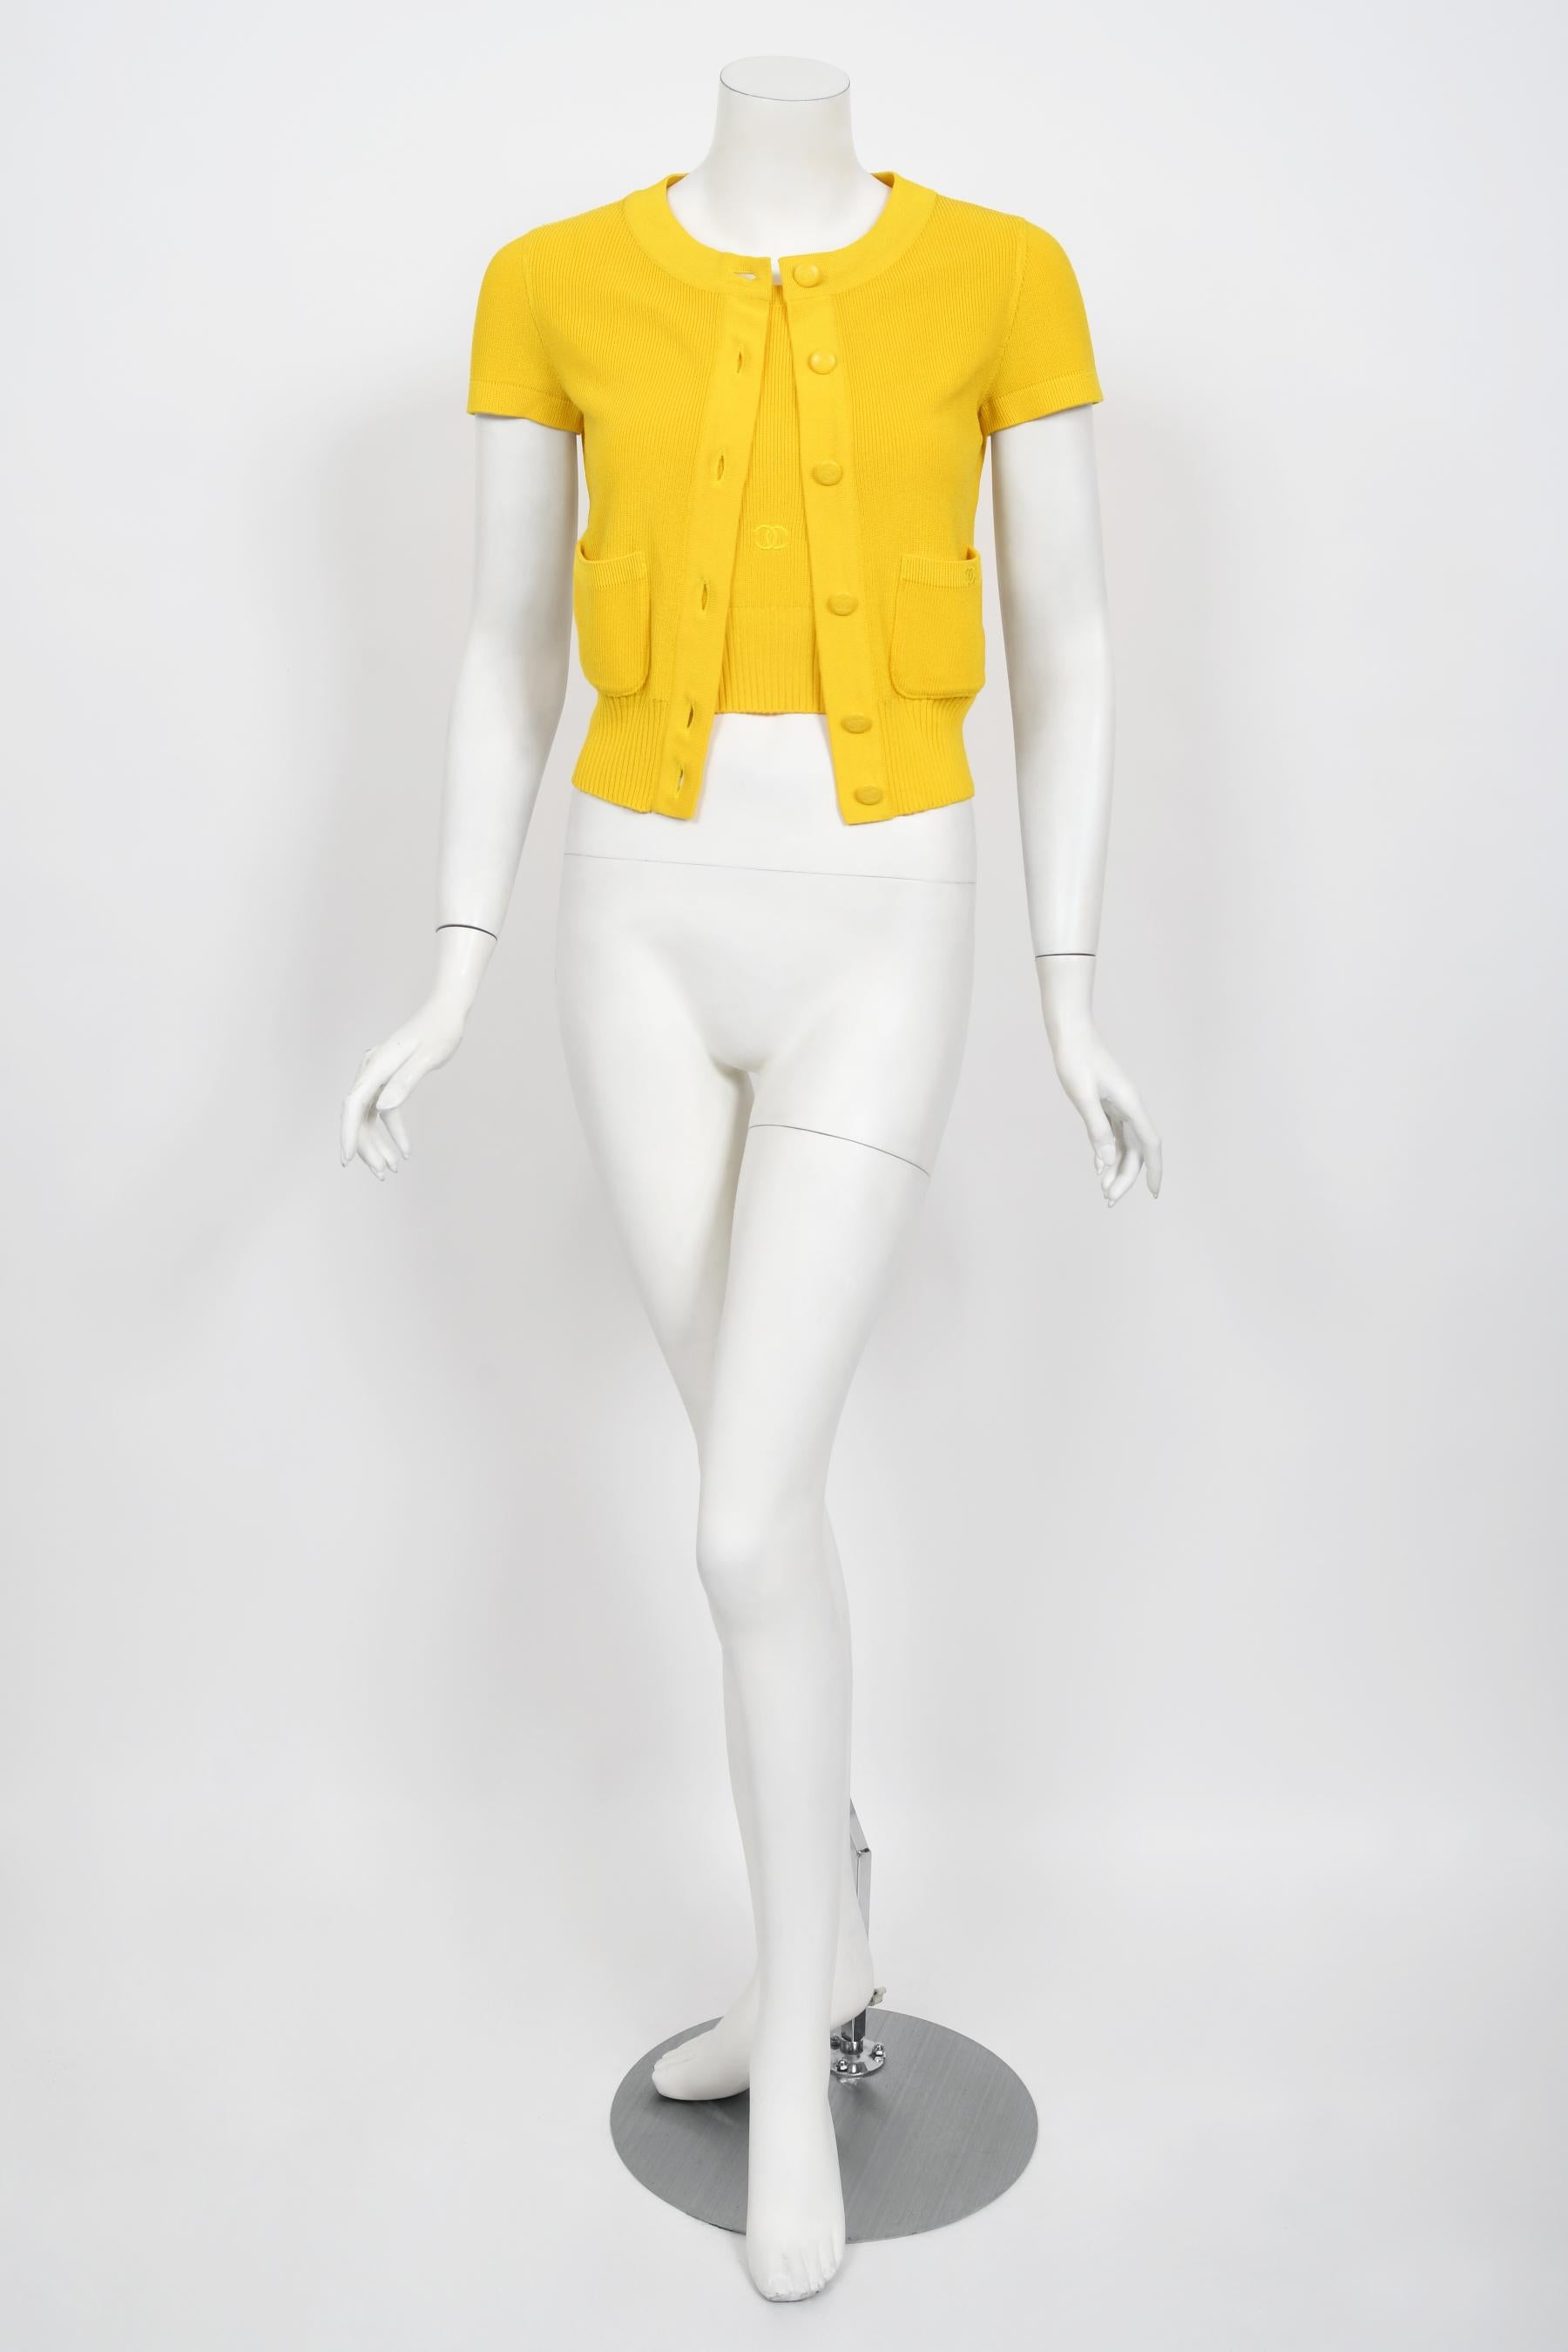 Vintage 1996 Chanel by Karl Lagerfeld Runway Yellow Knit Cropped Sweater Set  7